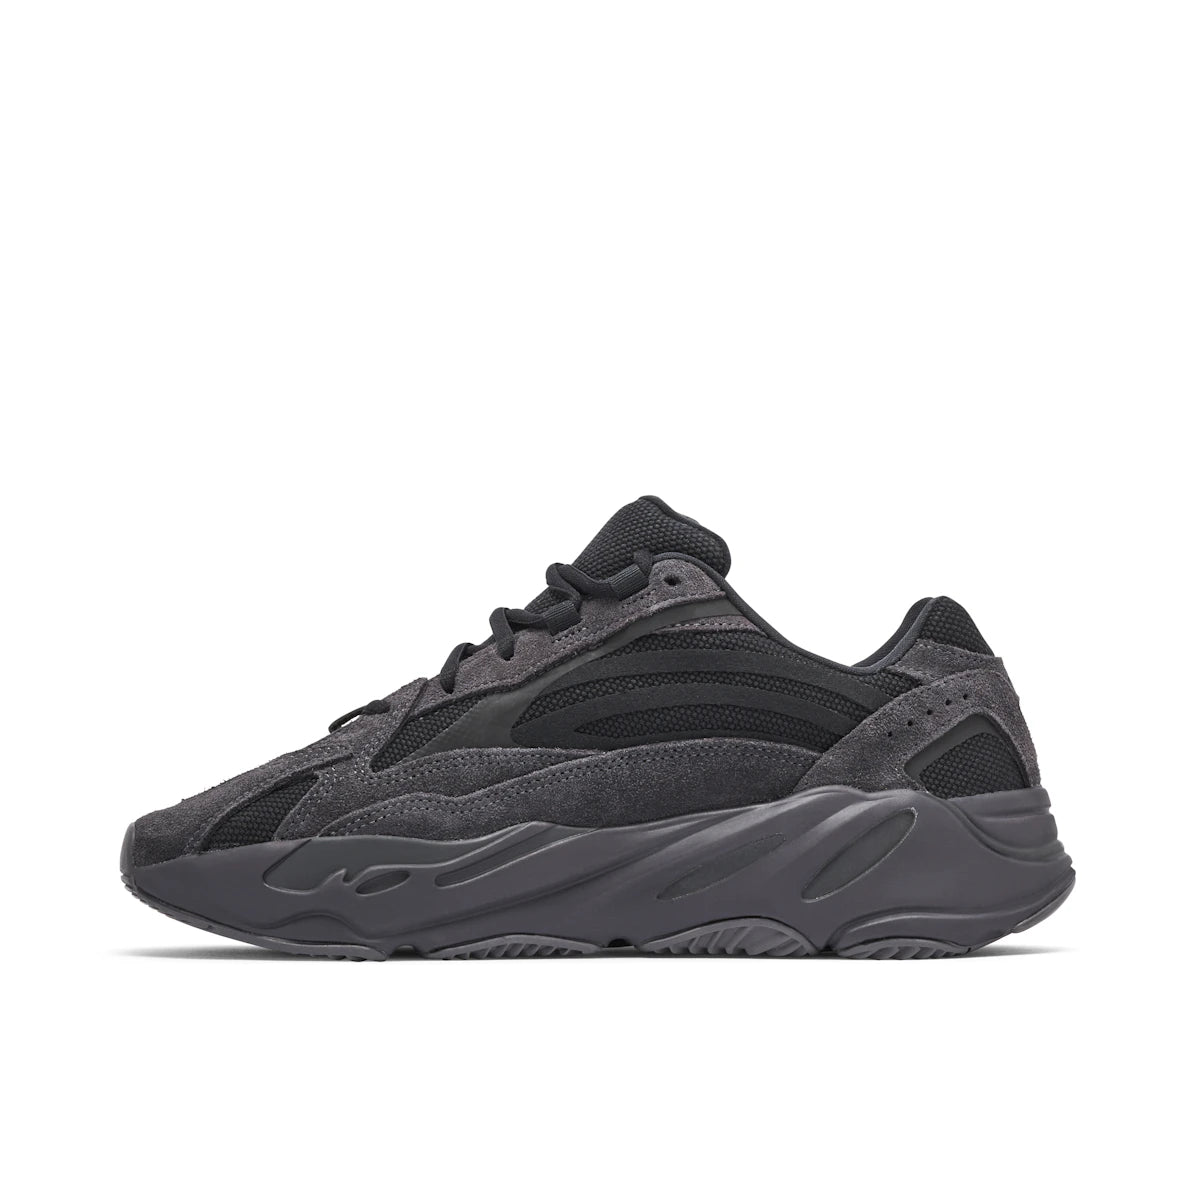 Adidas Yeezy Boost 700 V2 Vanta by Yeezy from £328.00